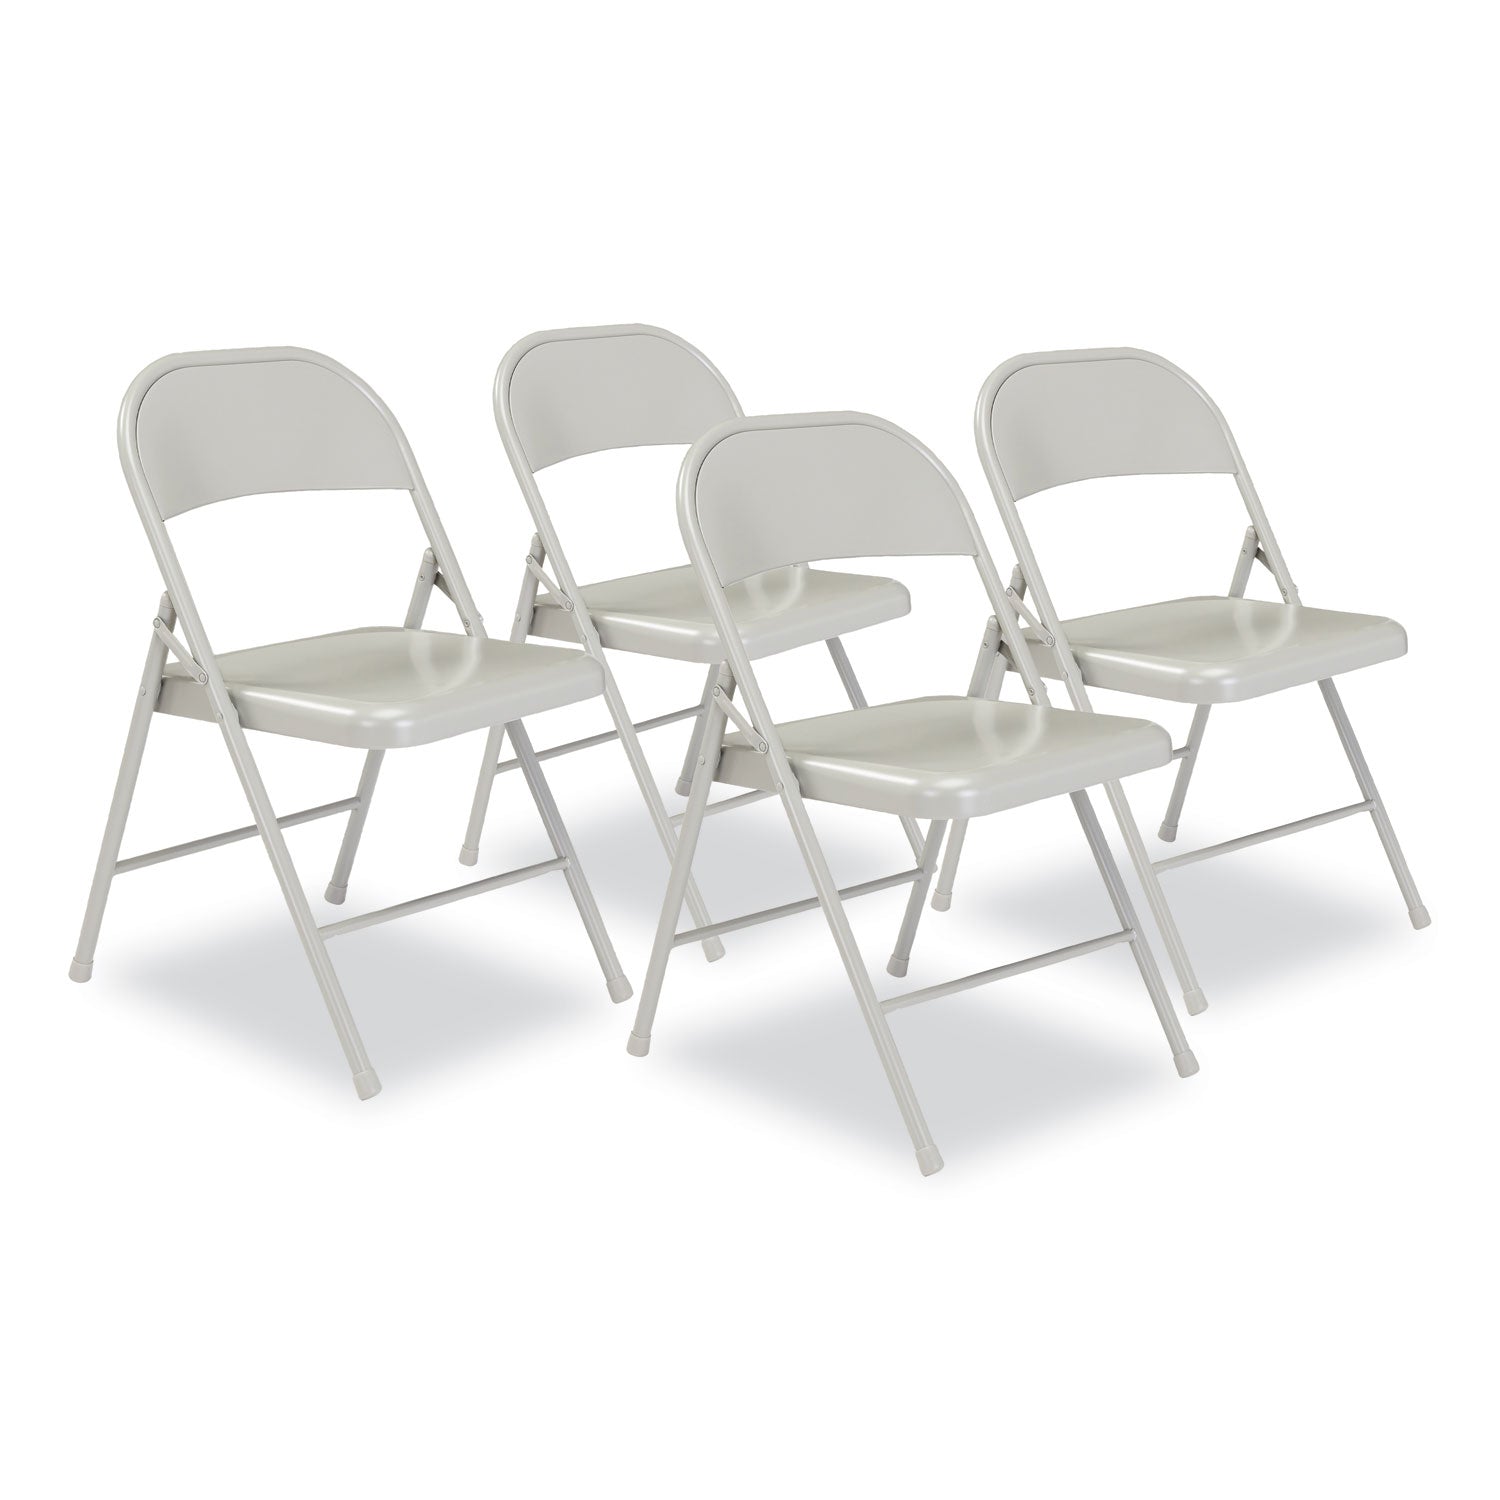 900-series-all-steel-folding-chair-supports-250-lb-1775-seat-height-gray-seat-back-base-4-ctships-in-1-3-business-days_nps902 - 1